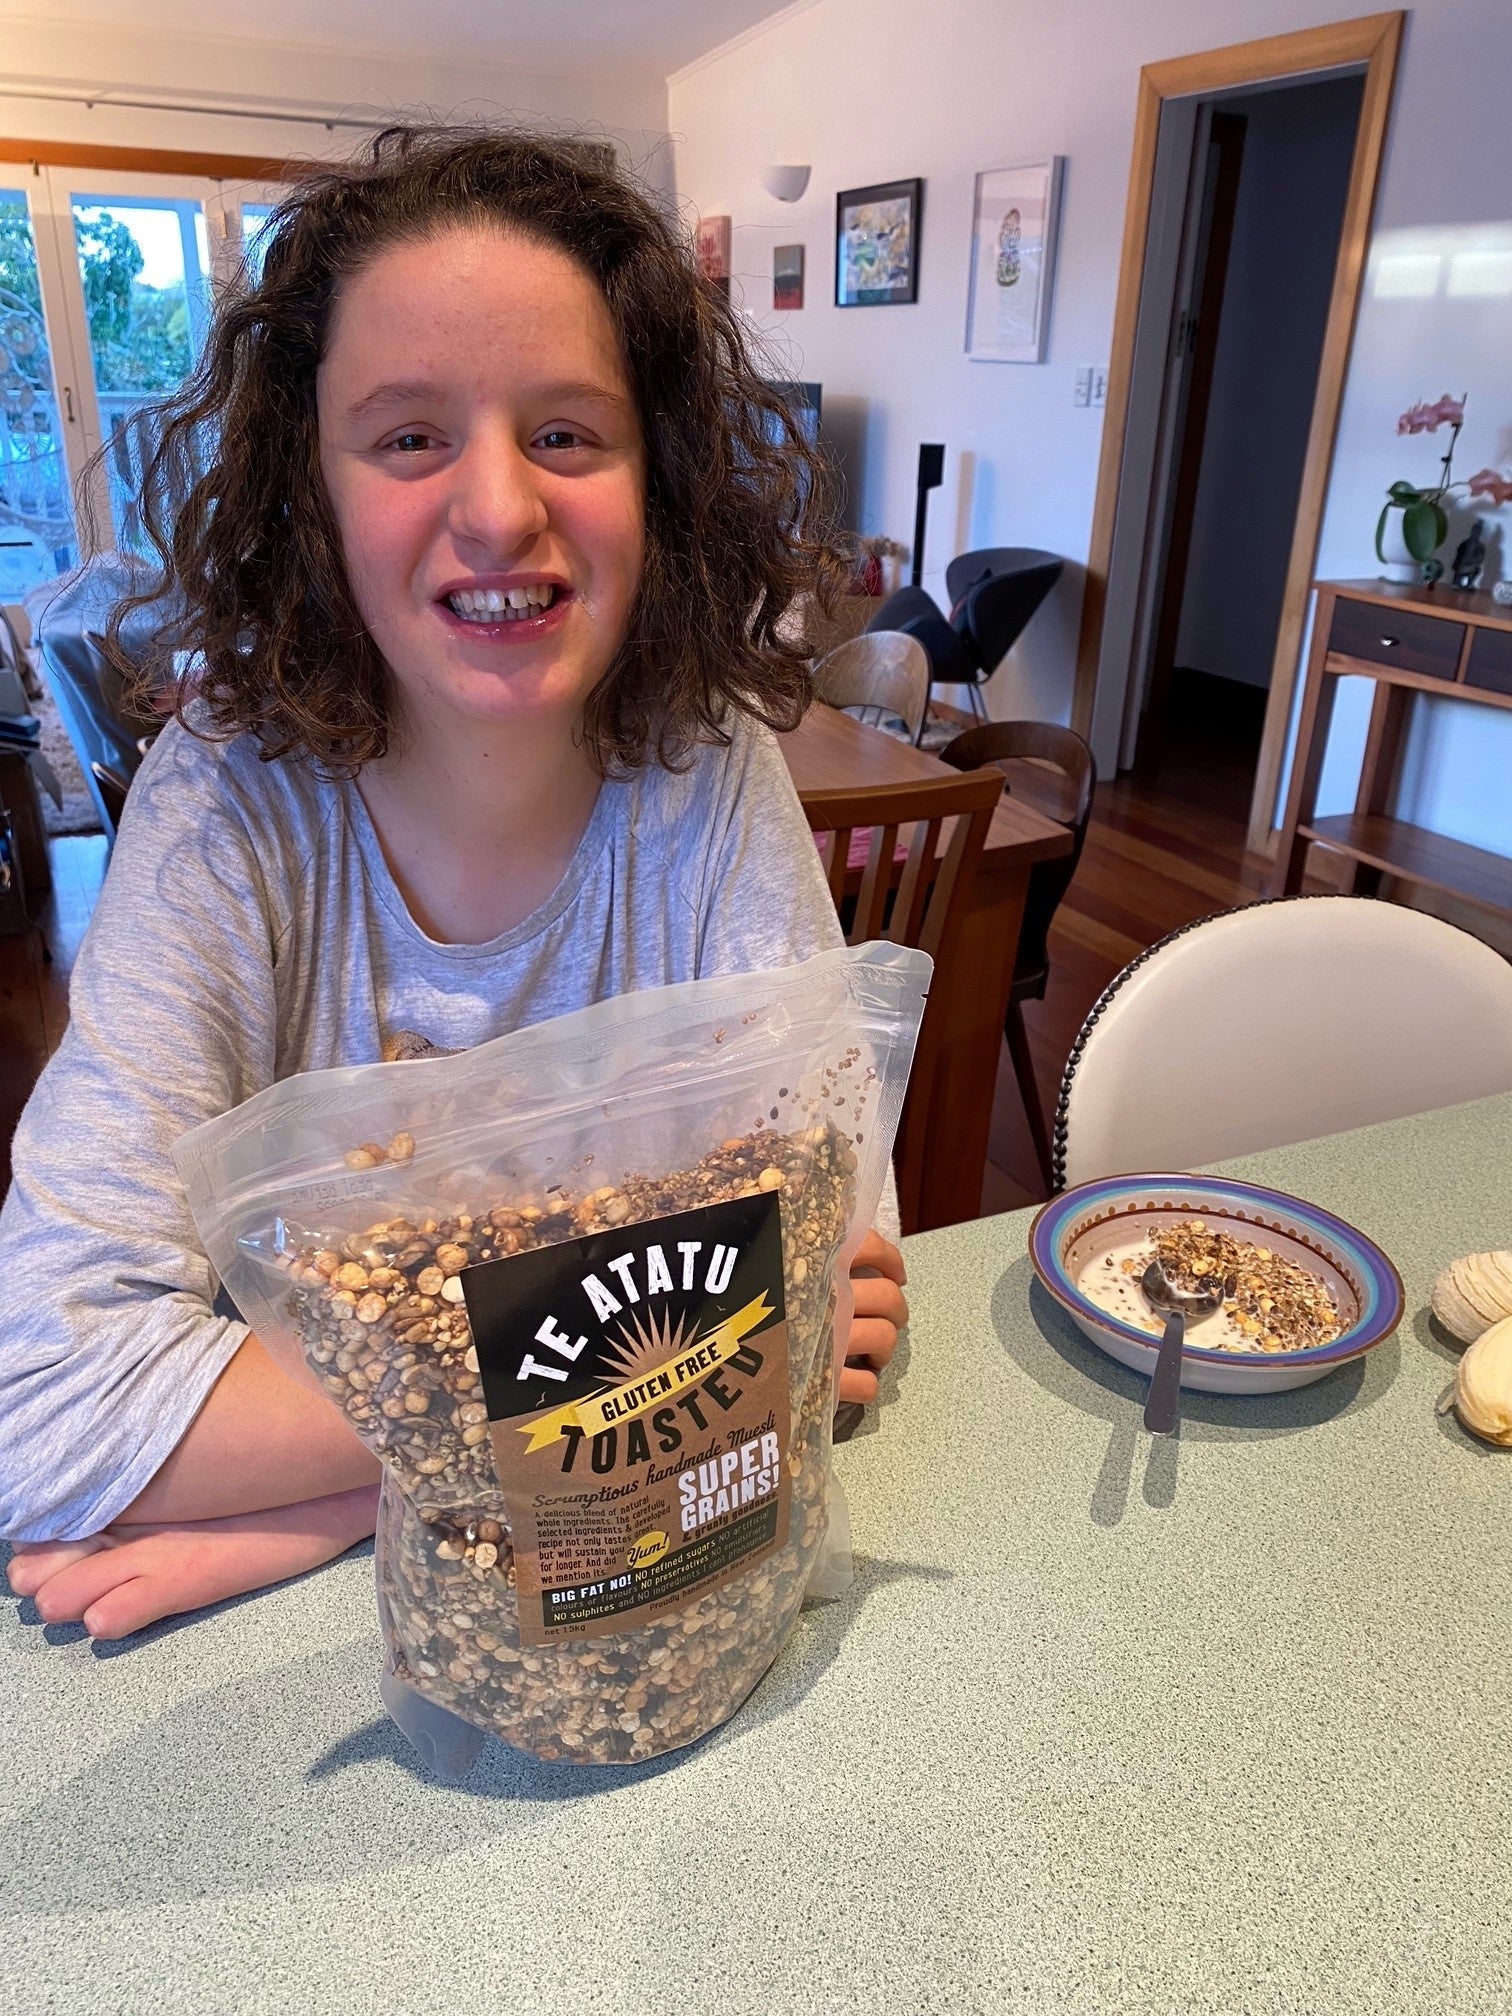 Lisa Mein lives in Westmere in central Auckland with her husband, their 15-year-old daughter, Lotte, who has special needs and is gluten intolerant, coeliac, so needs a great low sugar gluten free kids cereal